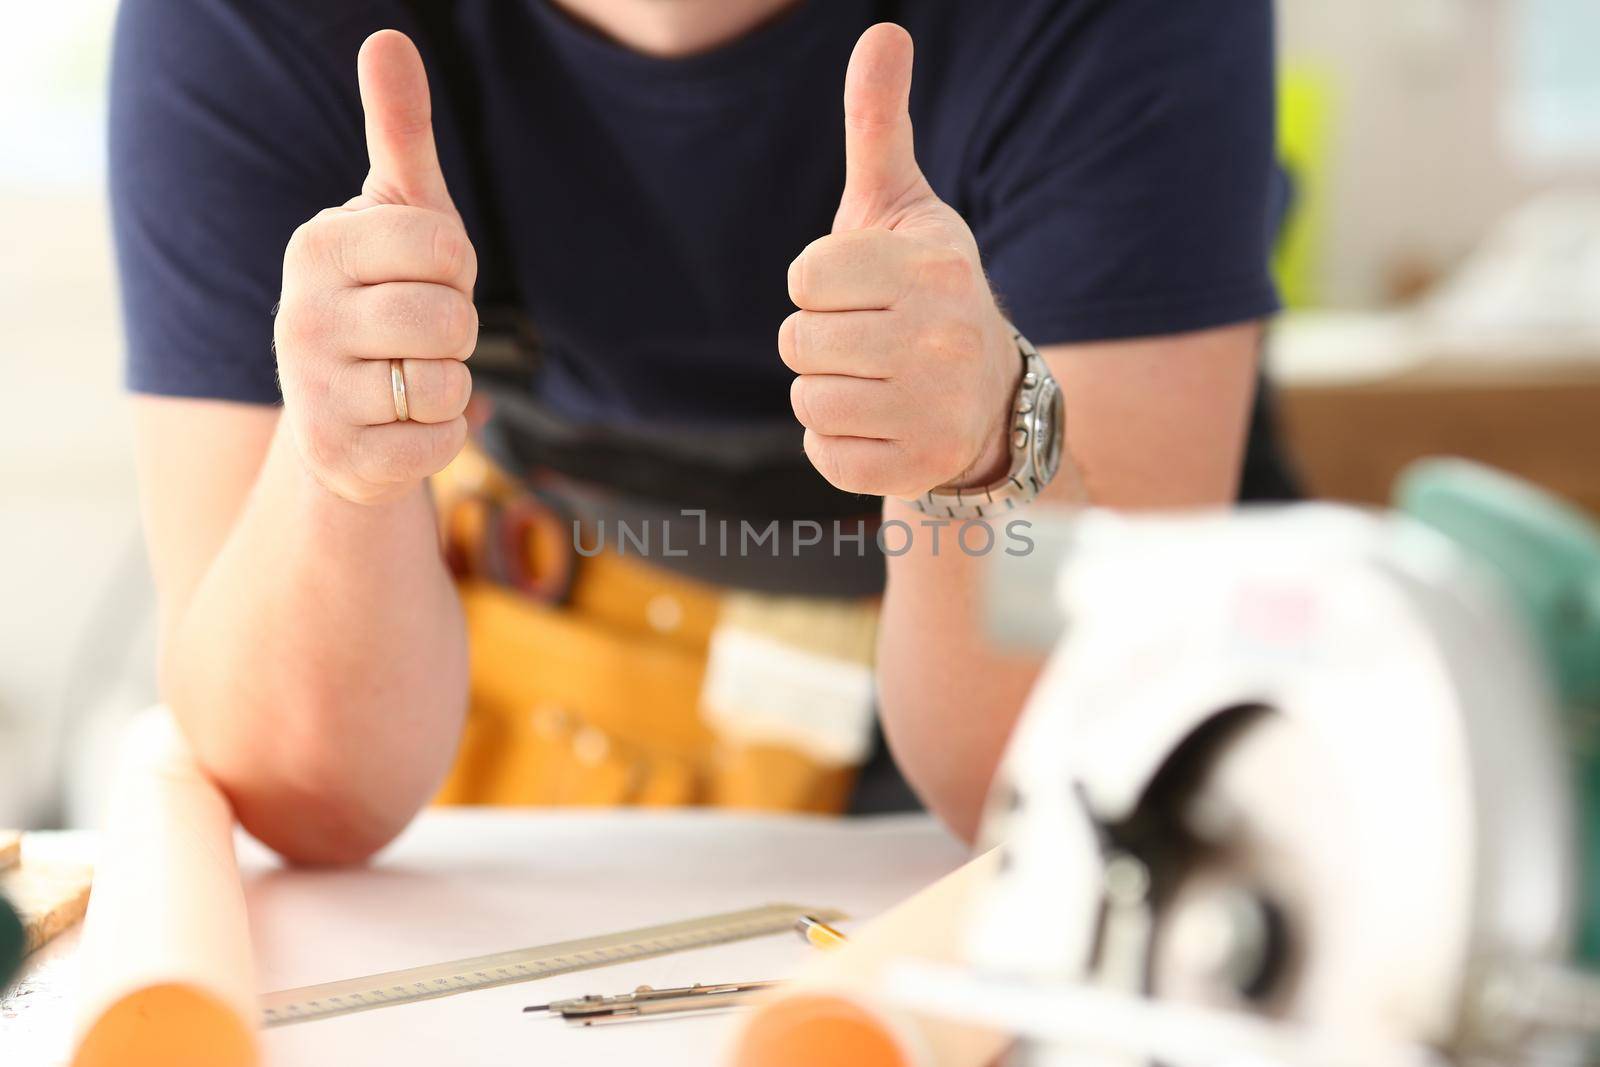 Arm of worker show confirm sign with thumb up closeup. Manual job DIY inspiration joinery startup idea fix shop hard hat industrial education profession career concept